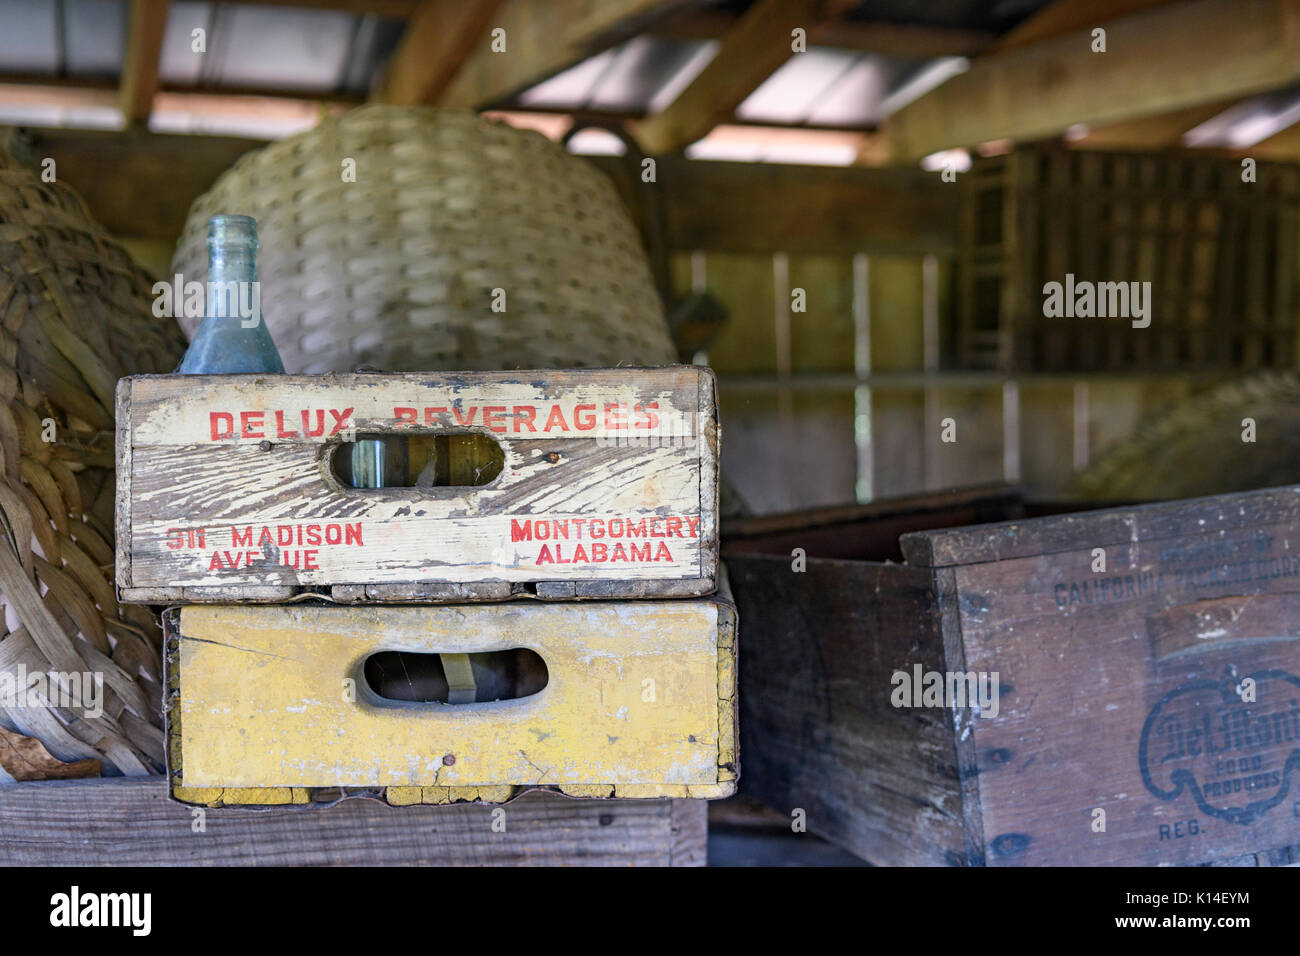 A Delux Beverages wooden crate among other vintage food and beverage crates stored in an old shed south of Montgomery, Alabama, USA. Stock Photo